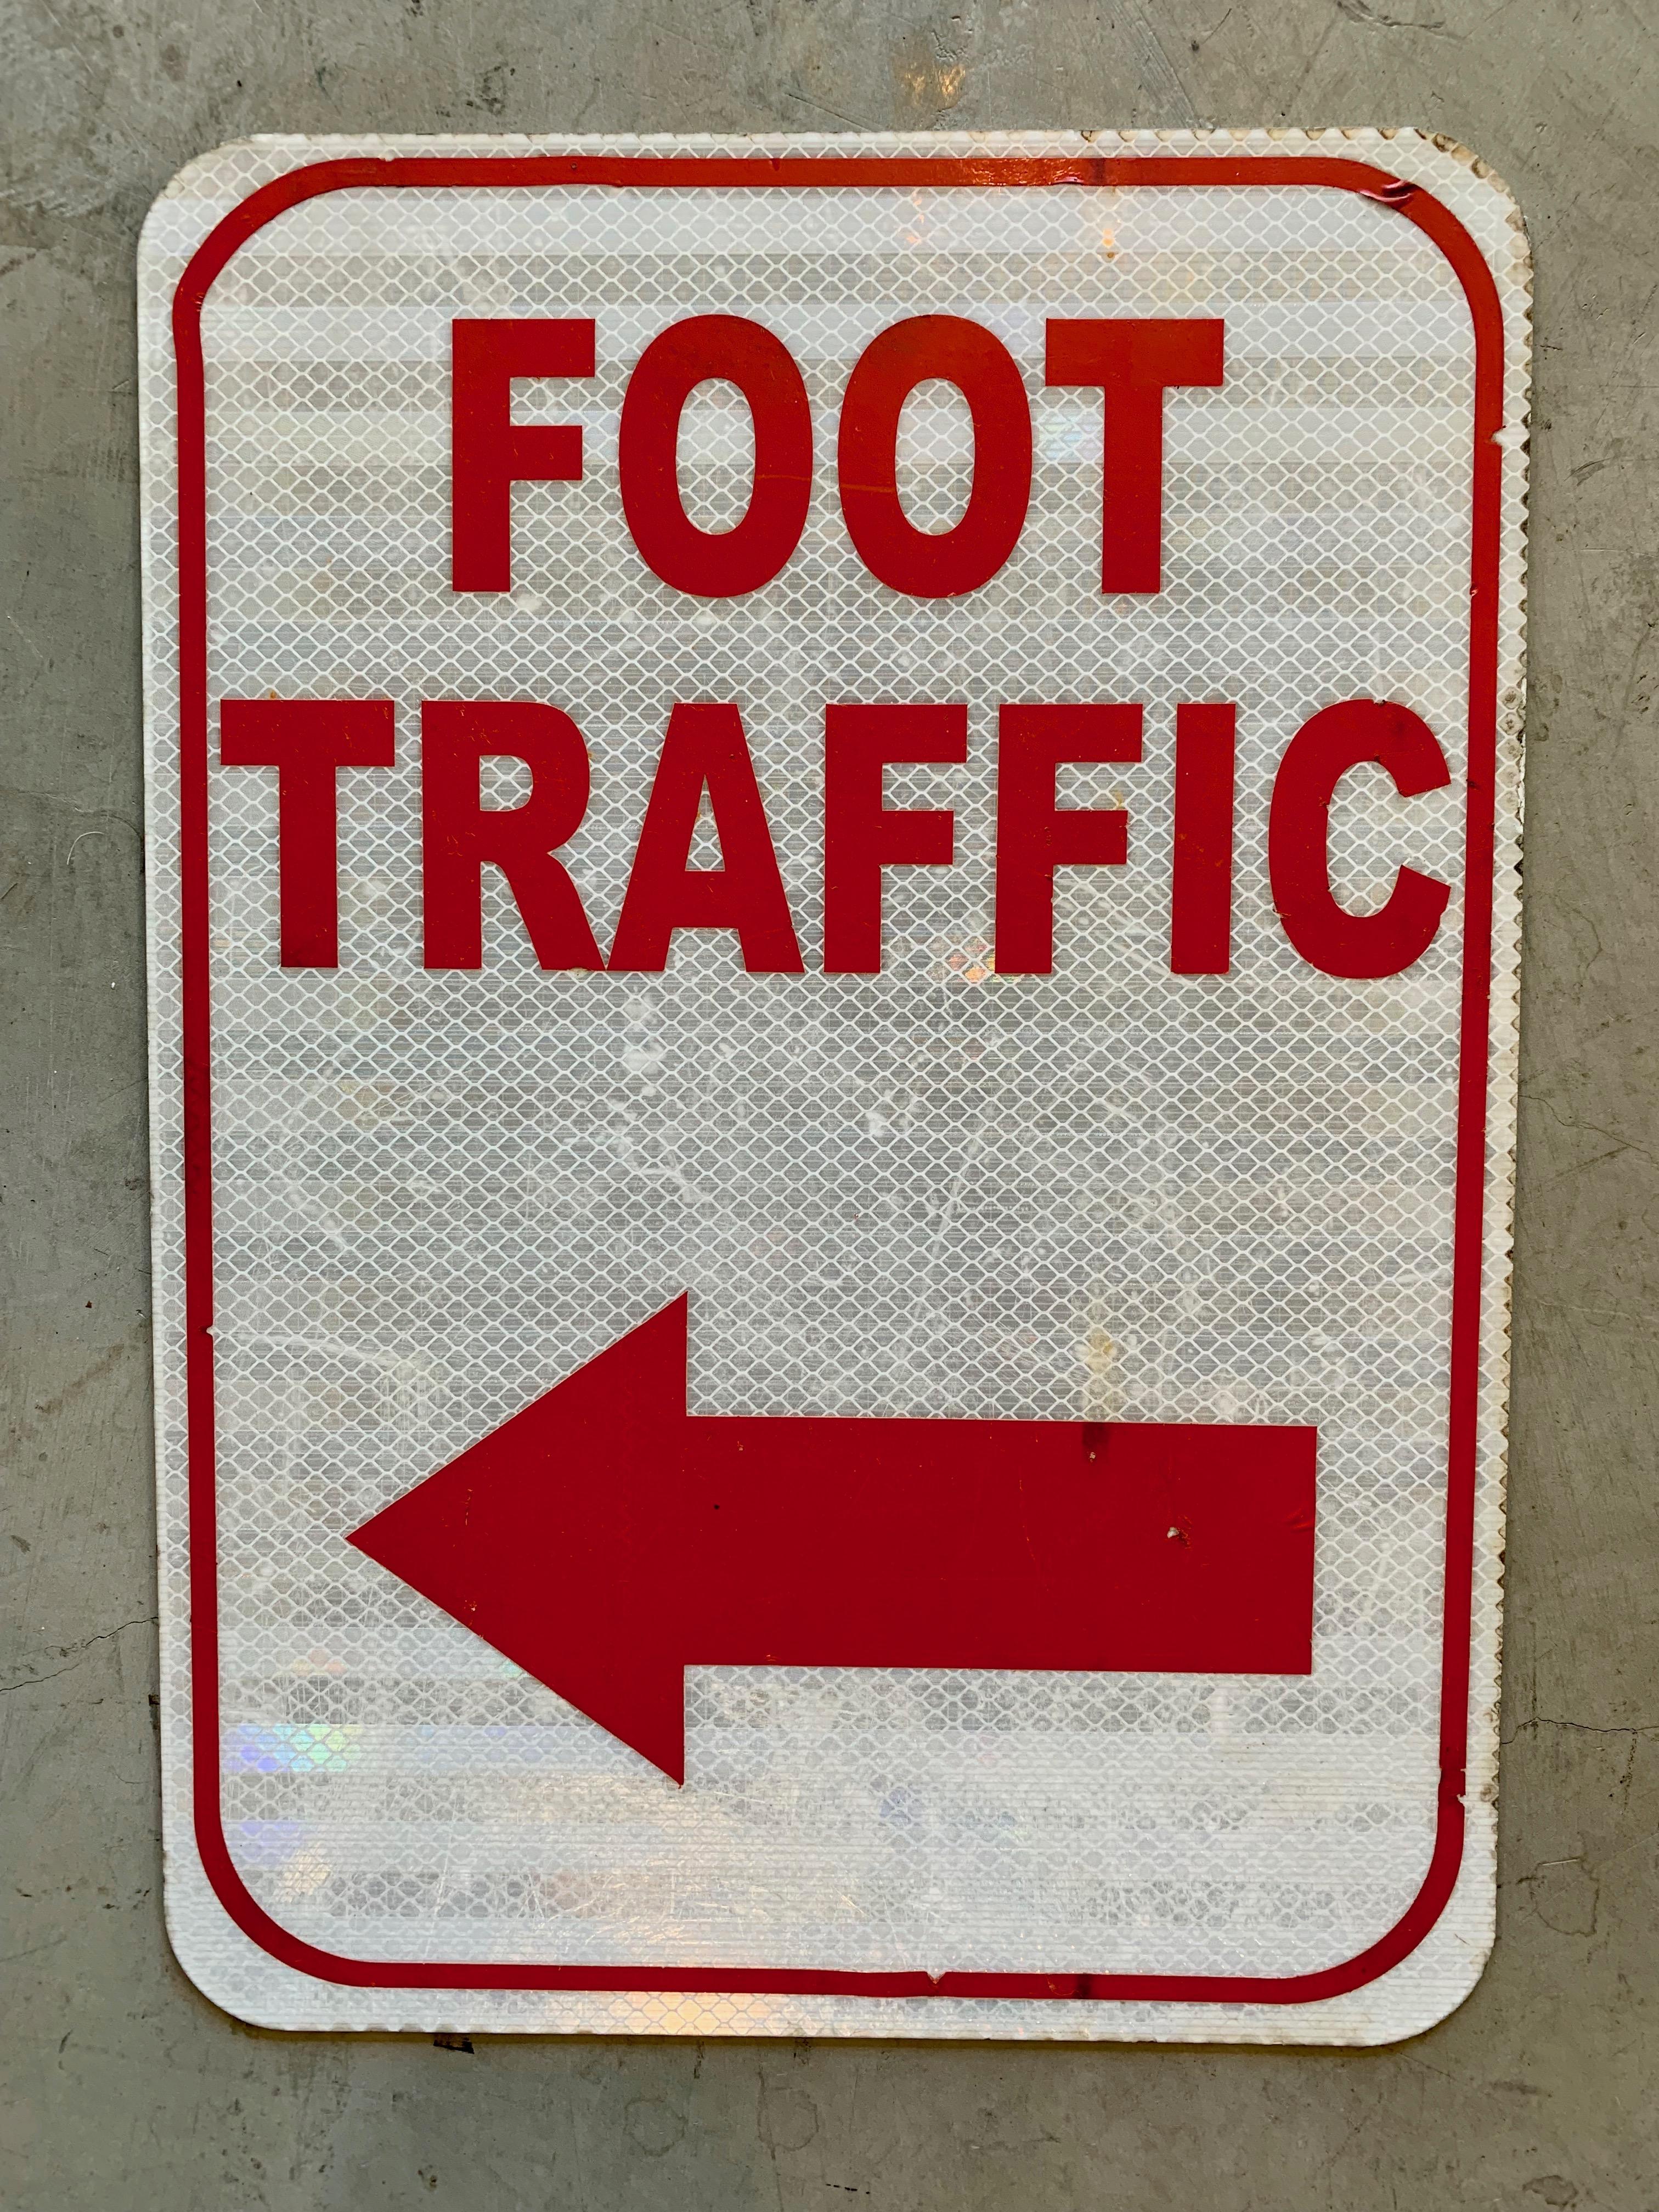 Interesting vintage road sign depicting the words 'FOOT TRAFFIC.